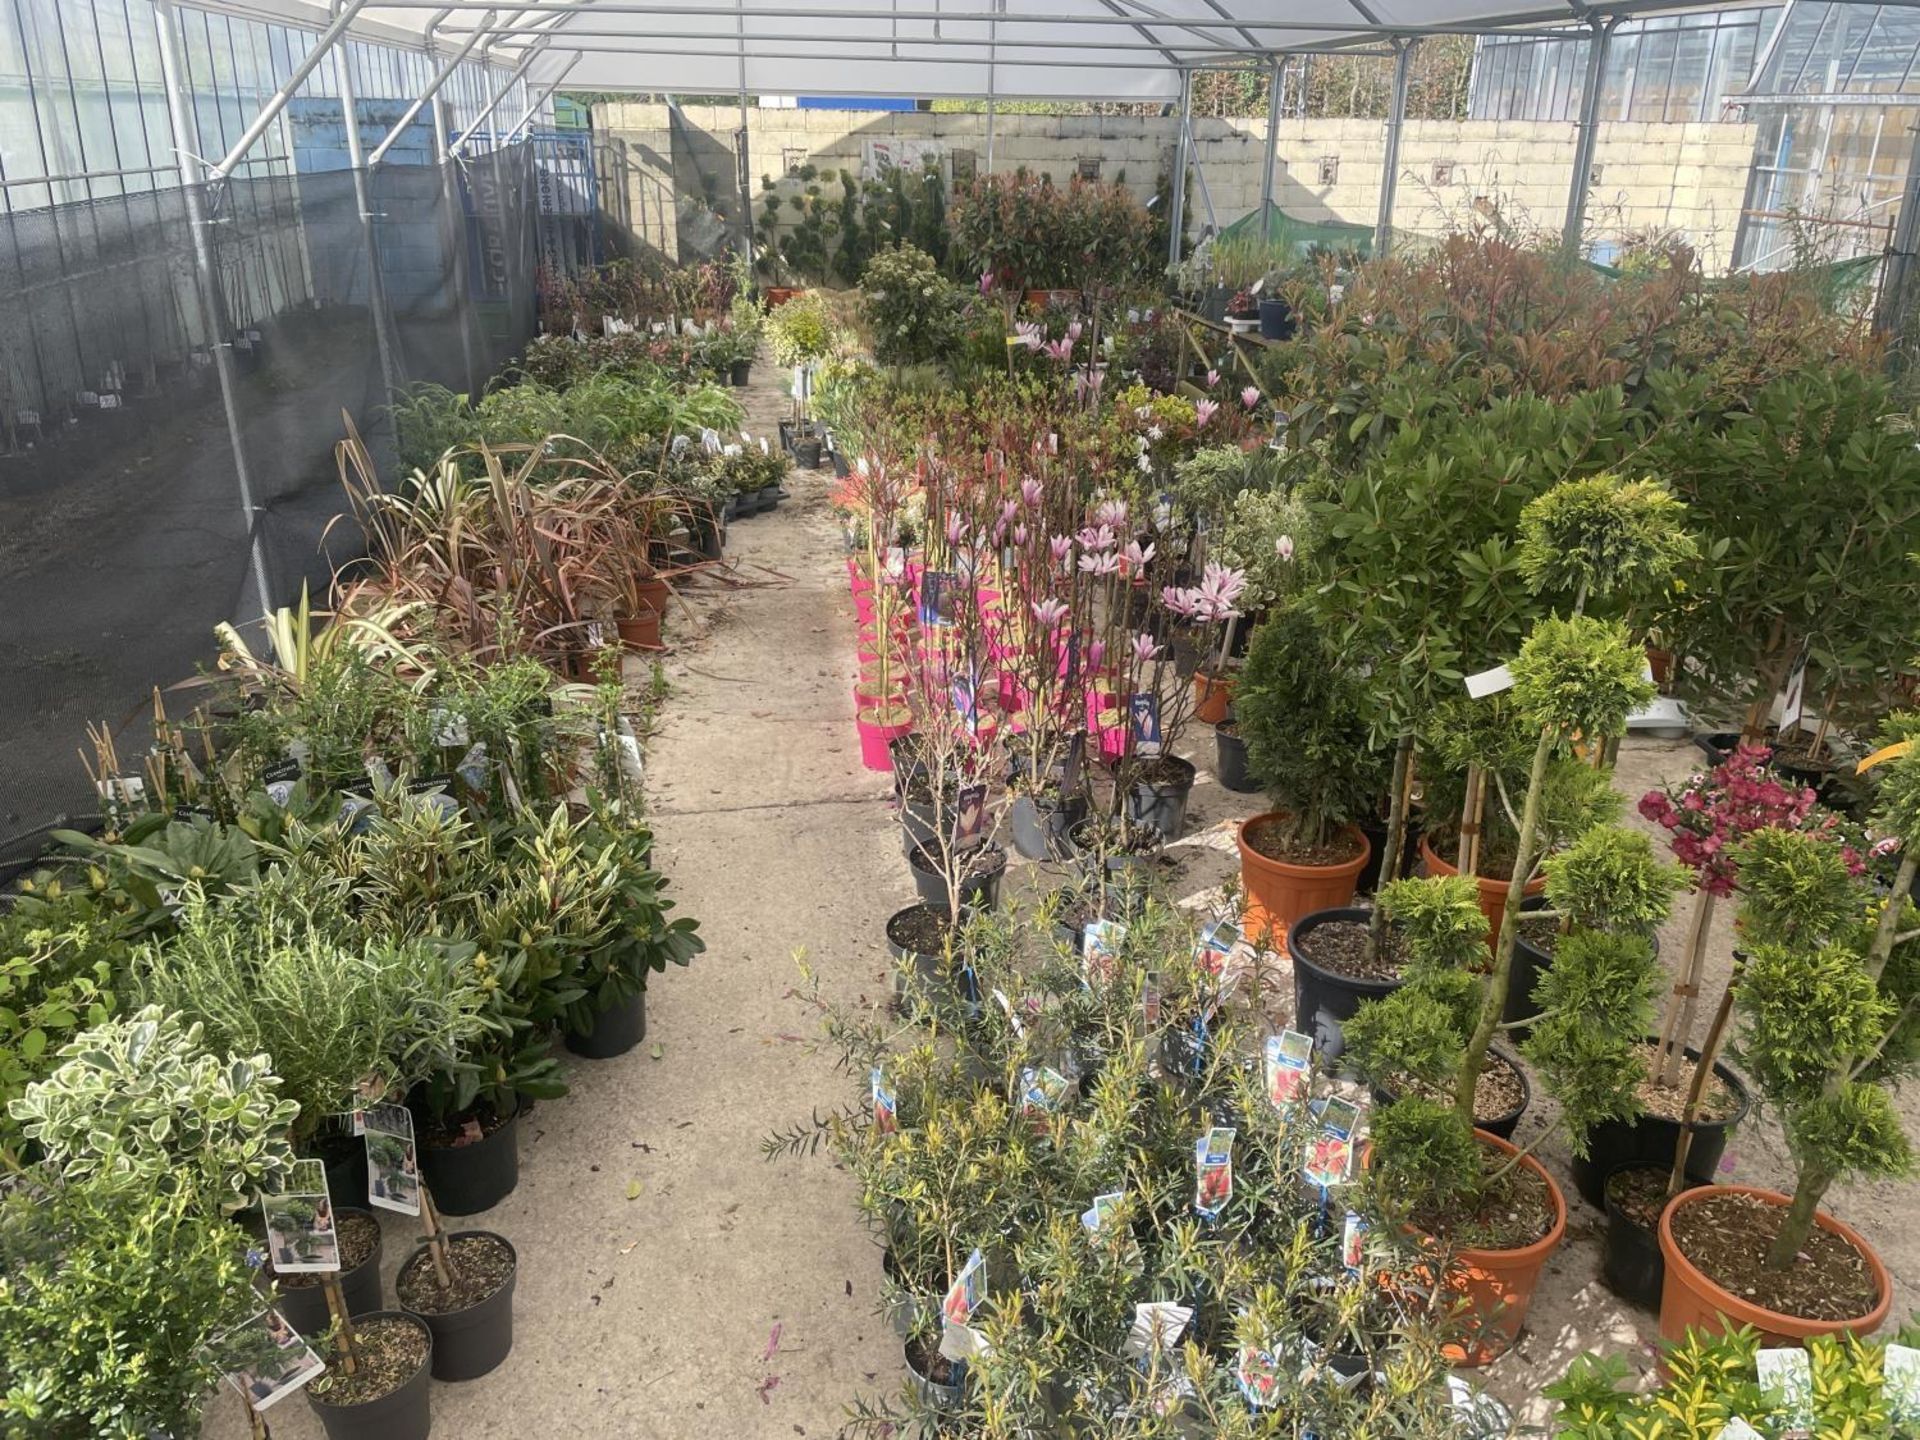 WELCOME TO ASHLEY WALLER HORTICULTURE AUCTION - LOTS ARE BEING ADDED DAILY - THE IMAGES SHOW LOTS